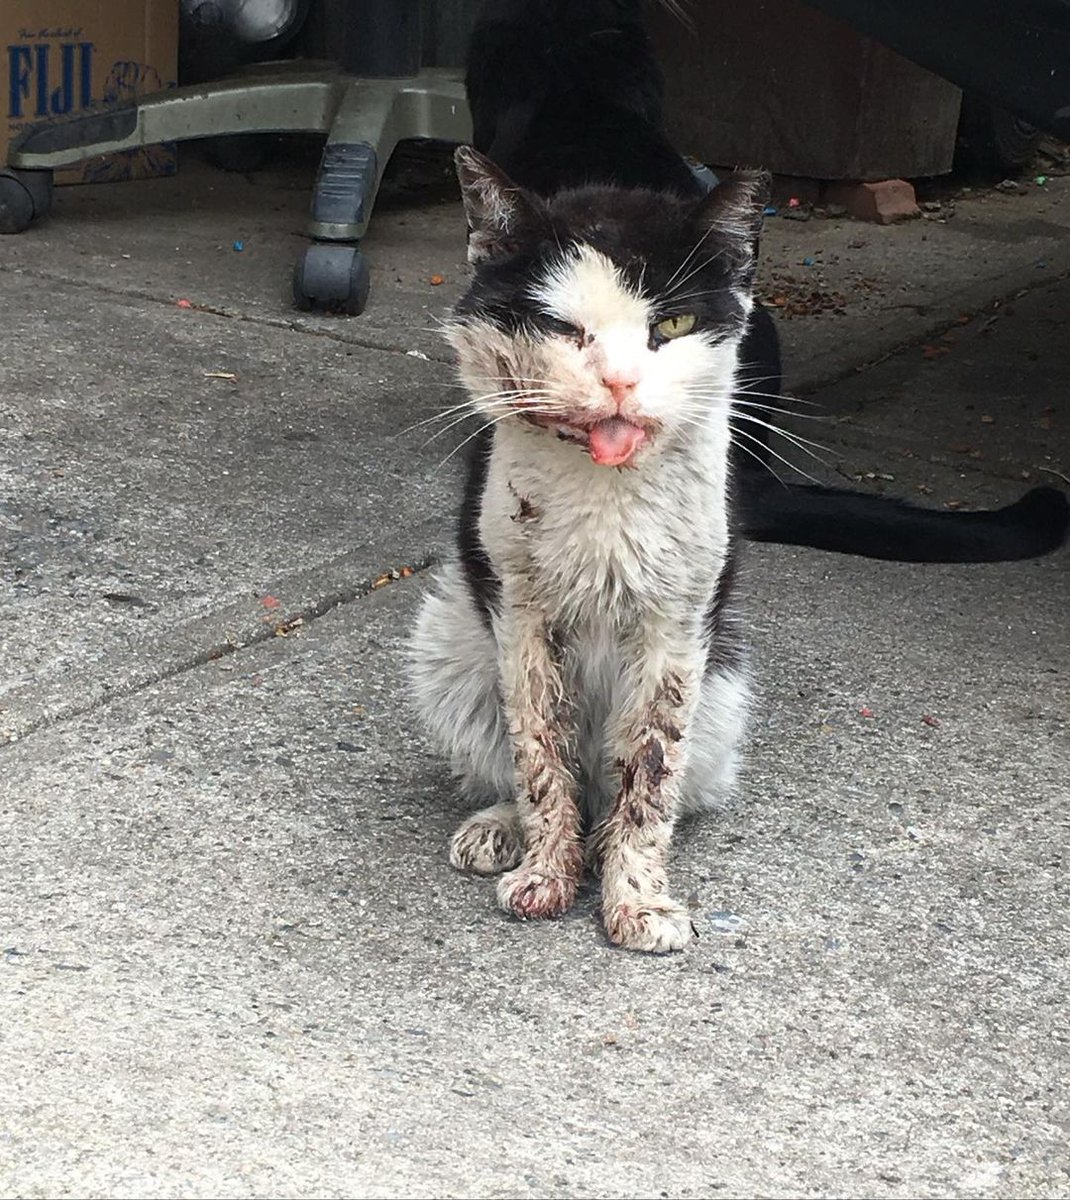 Another Emergency Rescue mission of the day! This poor cat! Stay tuned! 💔😭

Please donate whoever has the Opportunity don't hesitate to help😣🙏

The donation link is in bio 😔😔🙏🙏

#catlover #catlady #kittycuddles #kittylove #helpme #helpanimals #donations #donatetoday